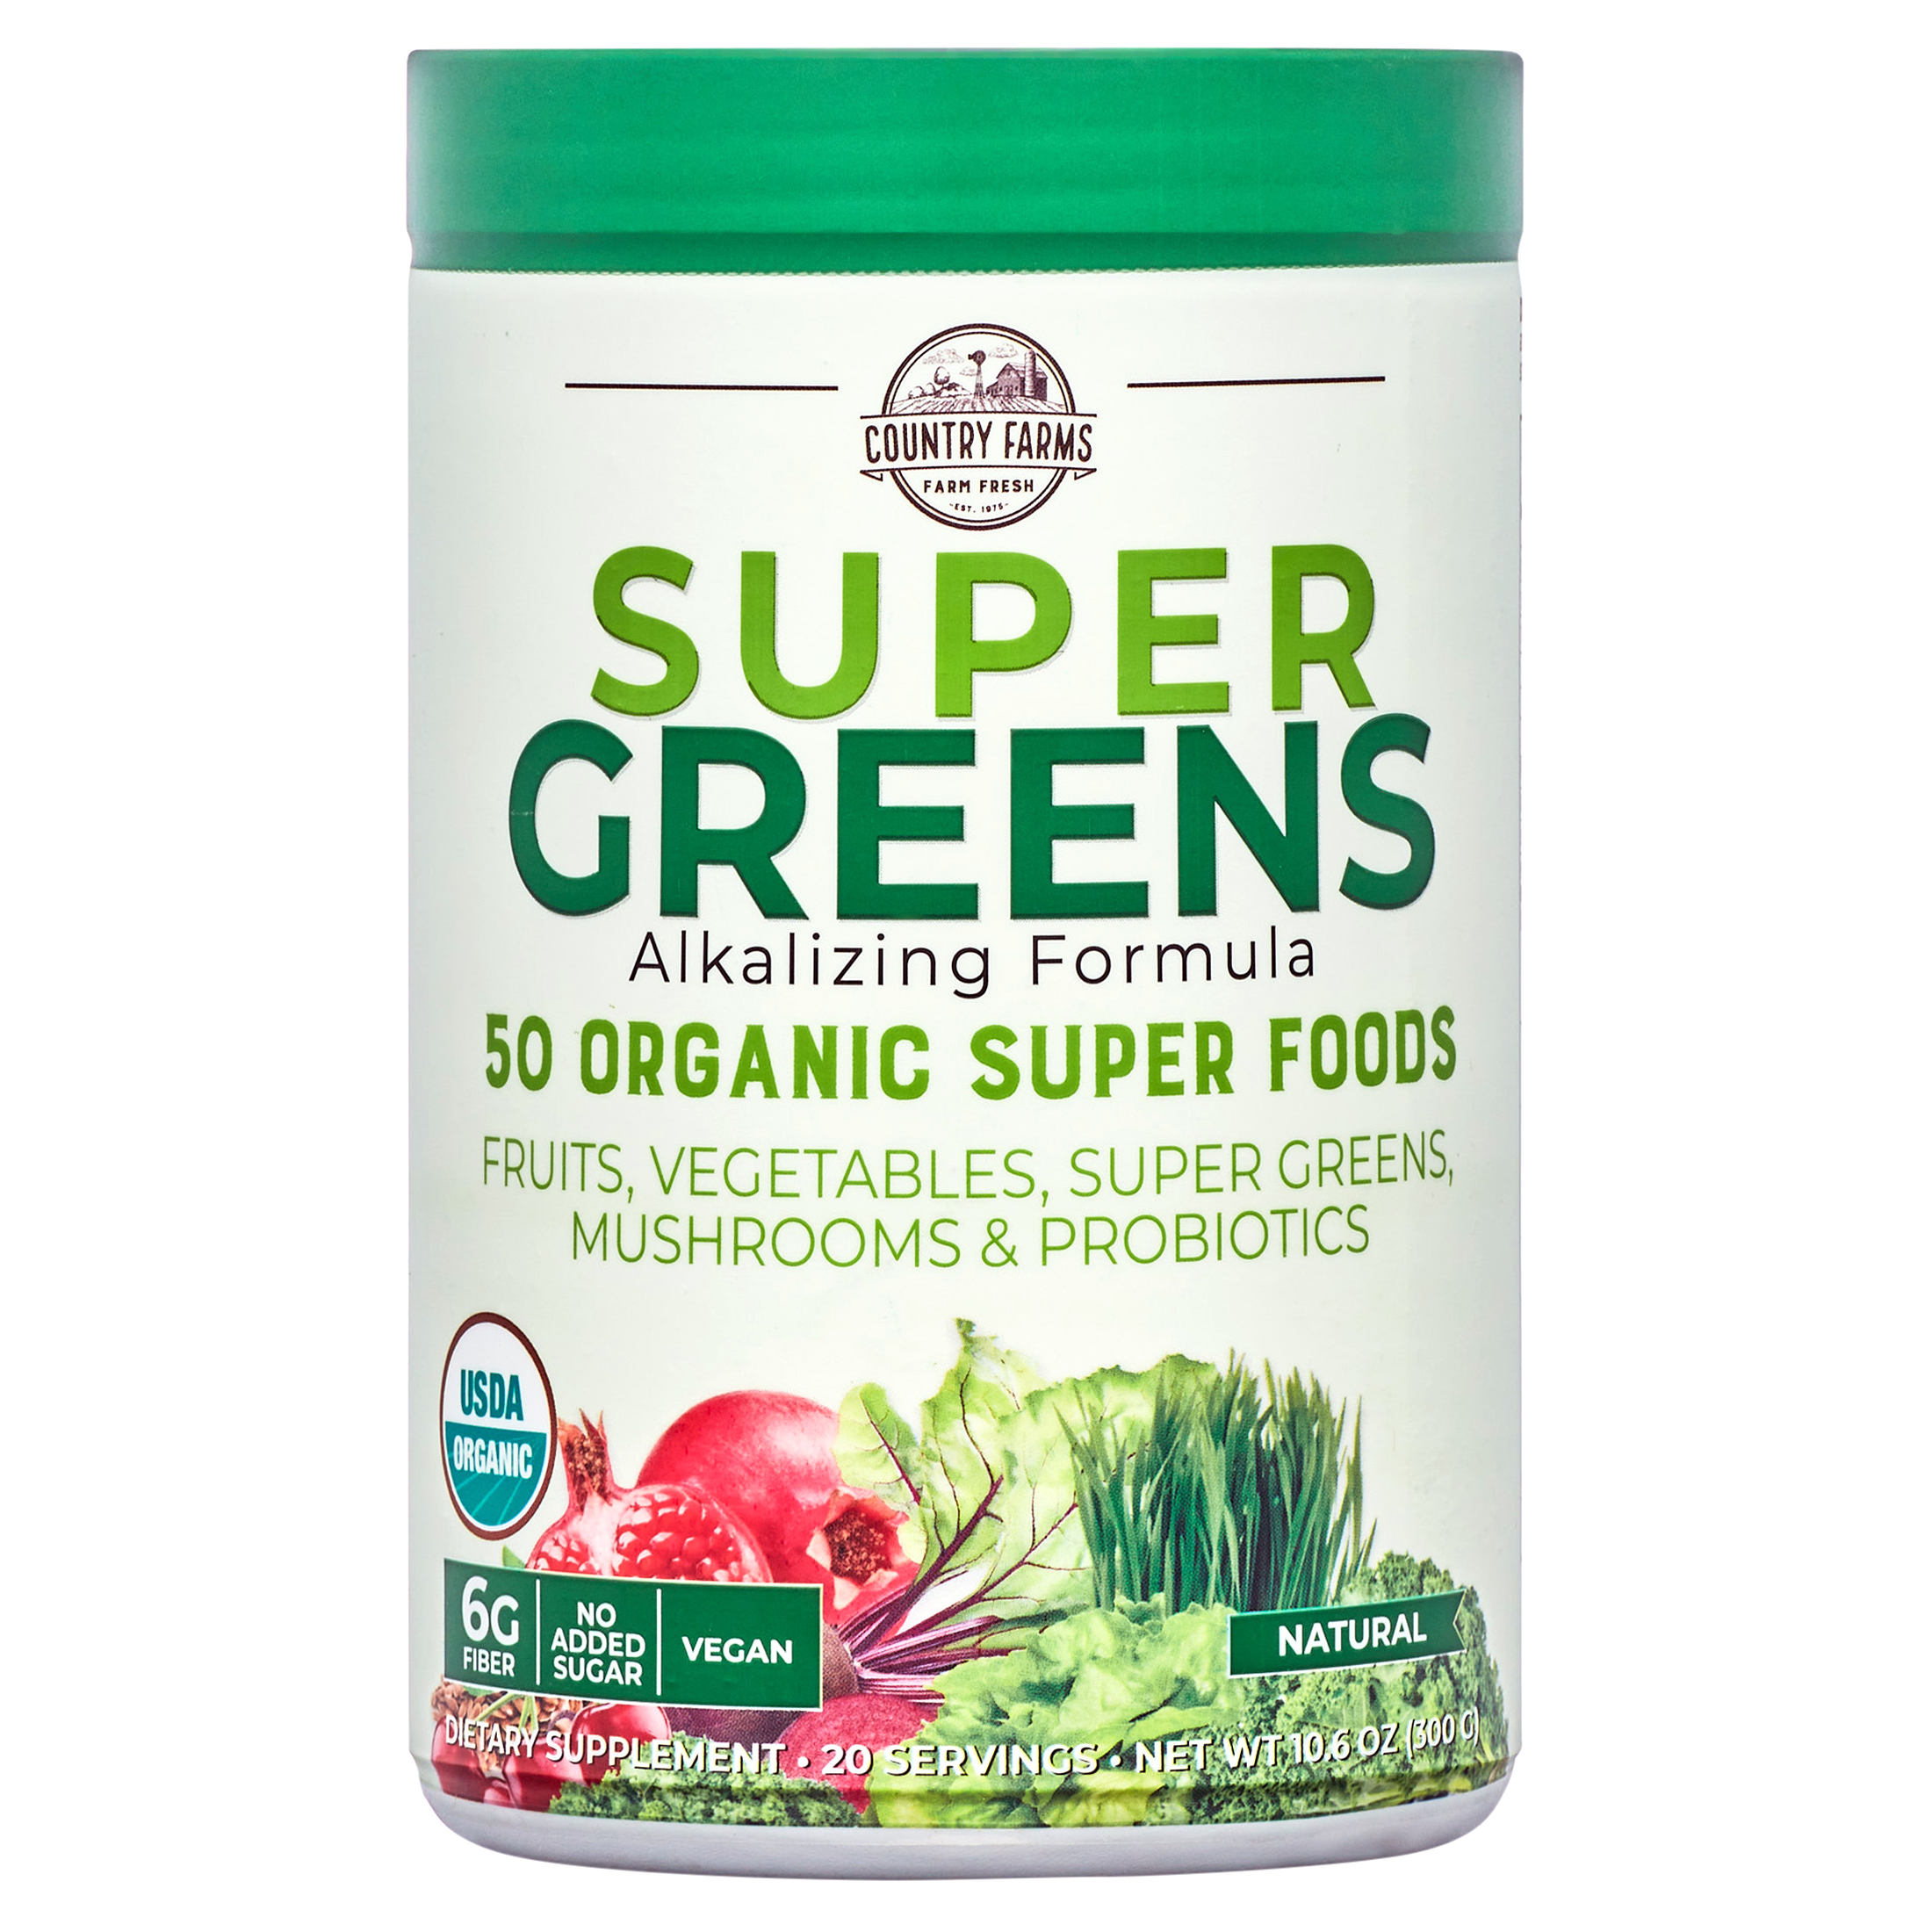 Country Farms Super Greens, Alkalizing Formula, Unflavored, 10.6 oz (300 g) - image 1 of 11